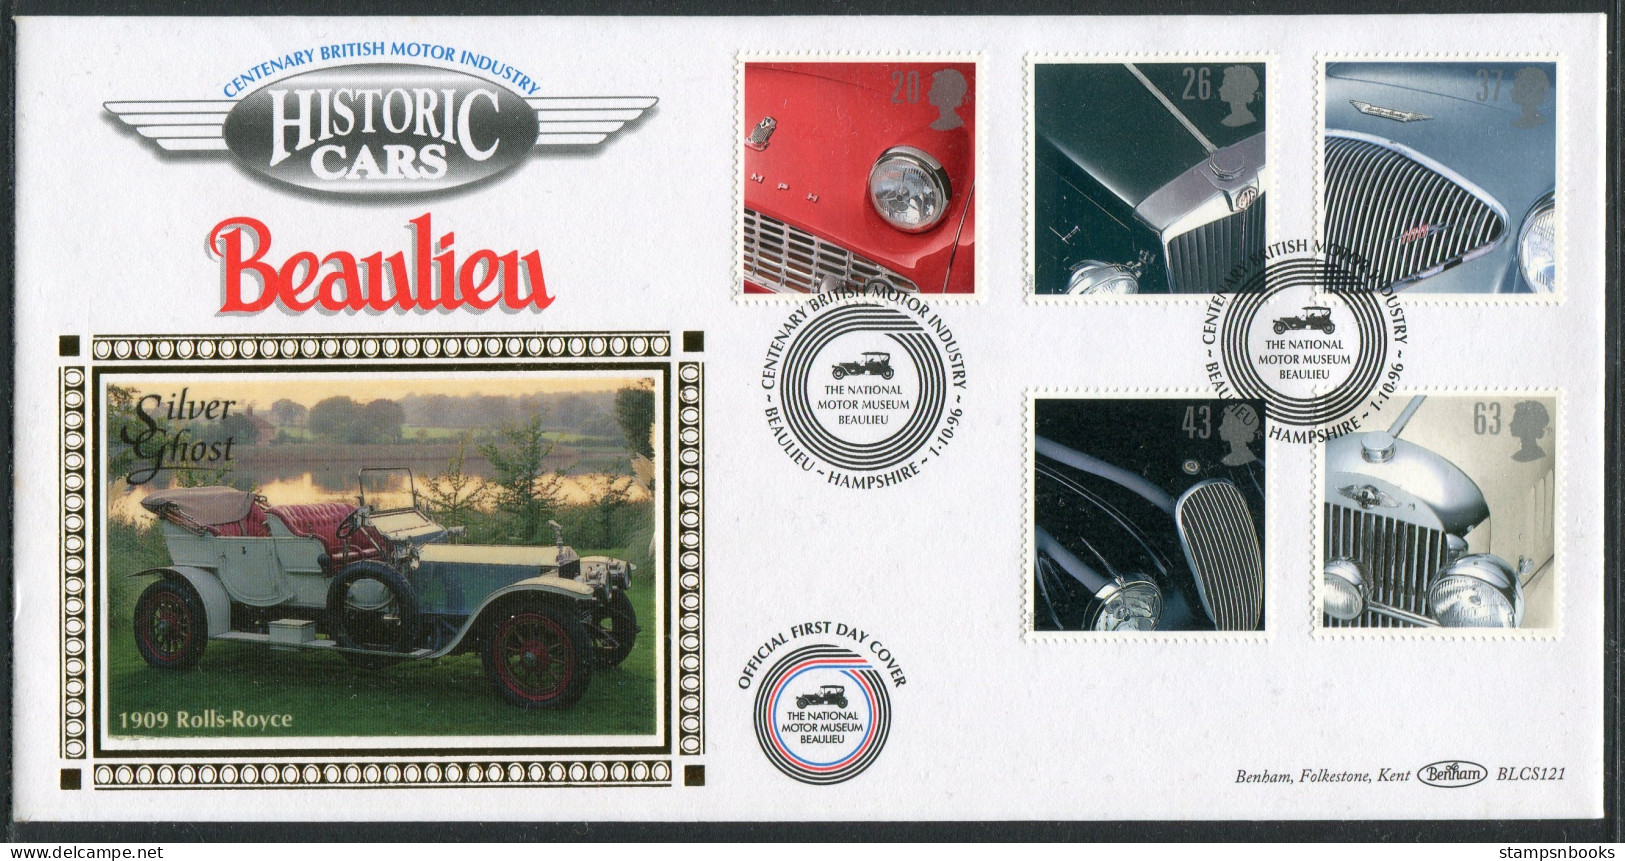 1996 GB Historic Cars First Day Cover, Rolls Royce Silver Ghost Beaulieu Motor Museum Benham BLCS 121 FDC - 1991-2000 Decimal Issues